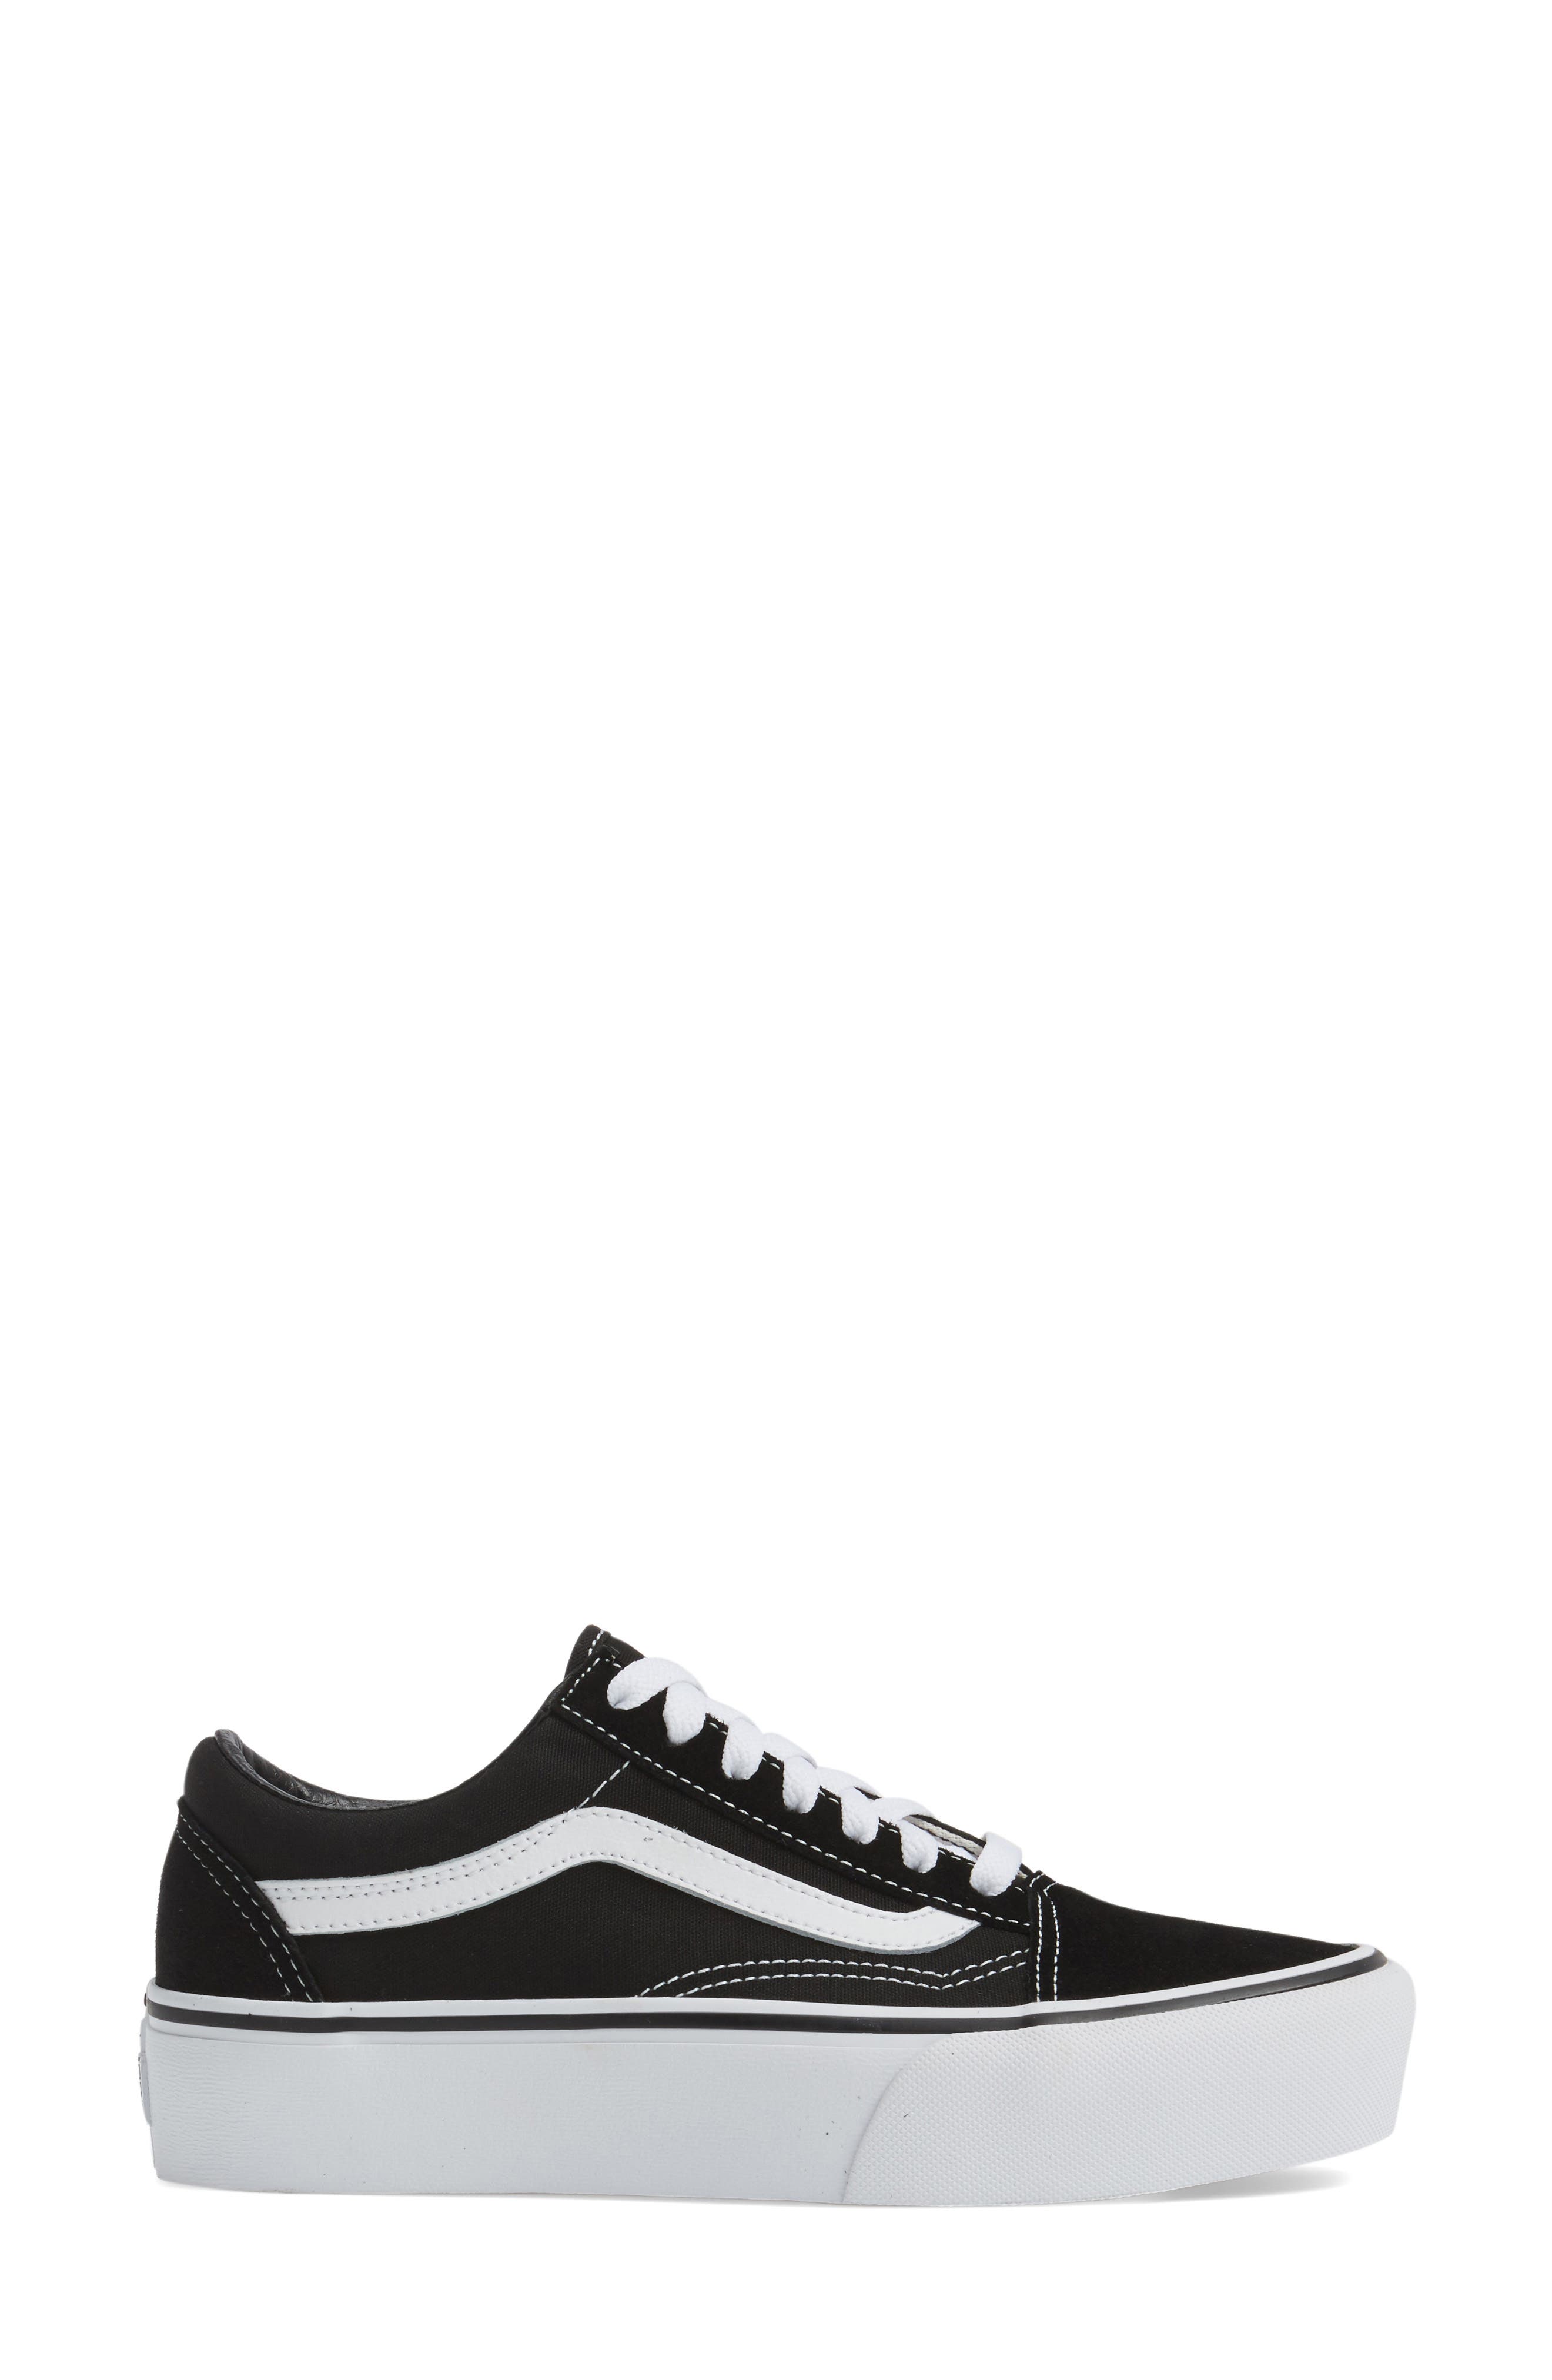 white and black low top vans